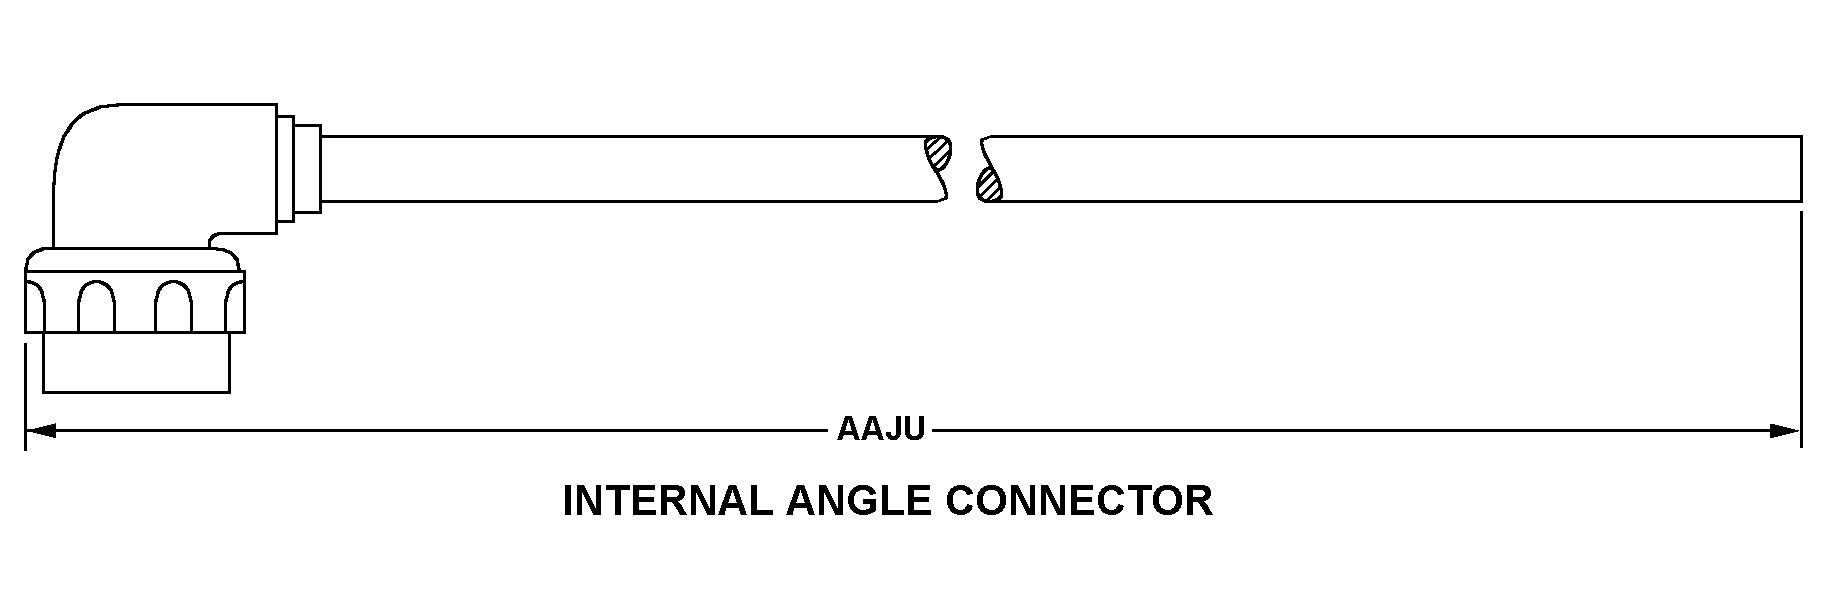 INTERNAL ANGLE CONNECTOR style nsn 5995-00-498-8769